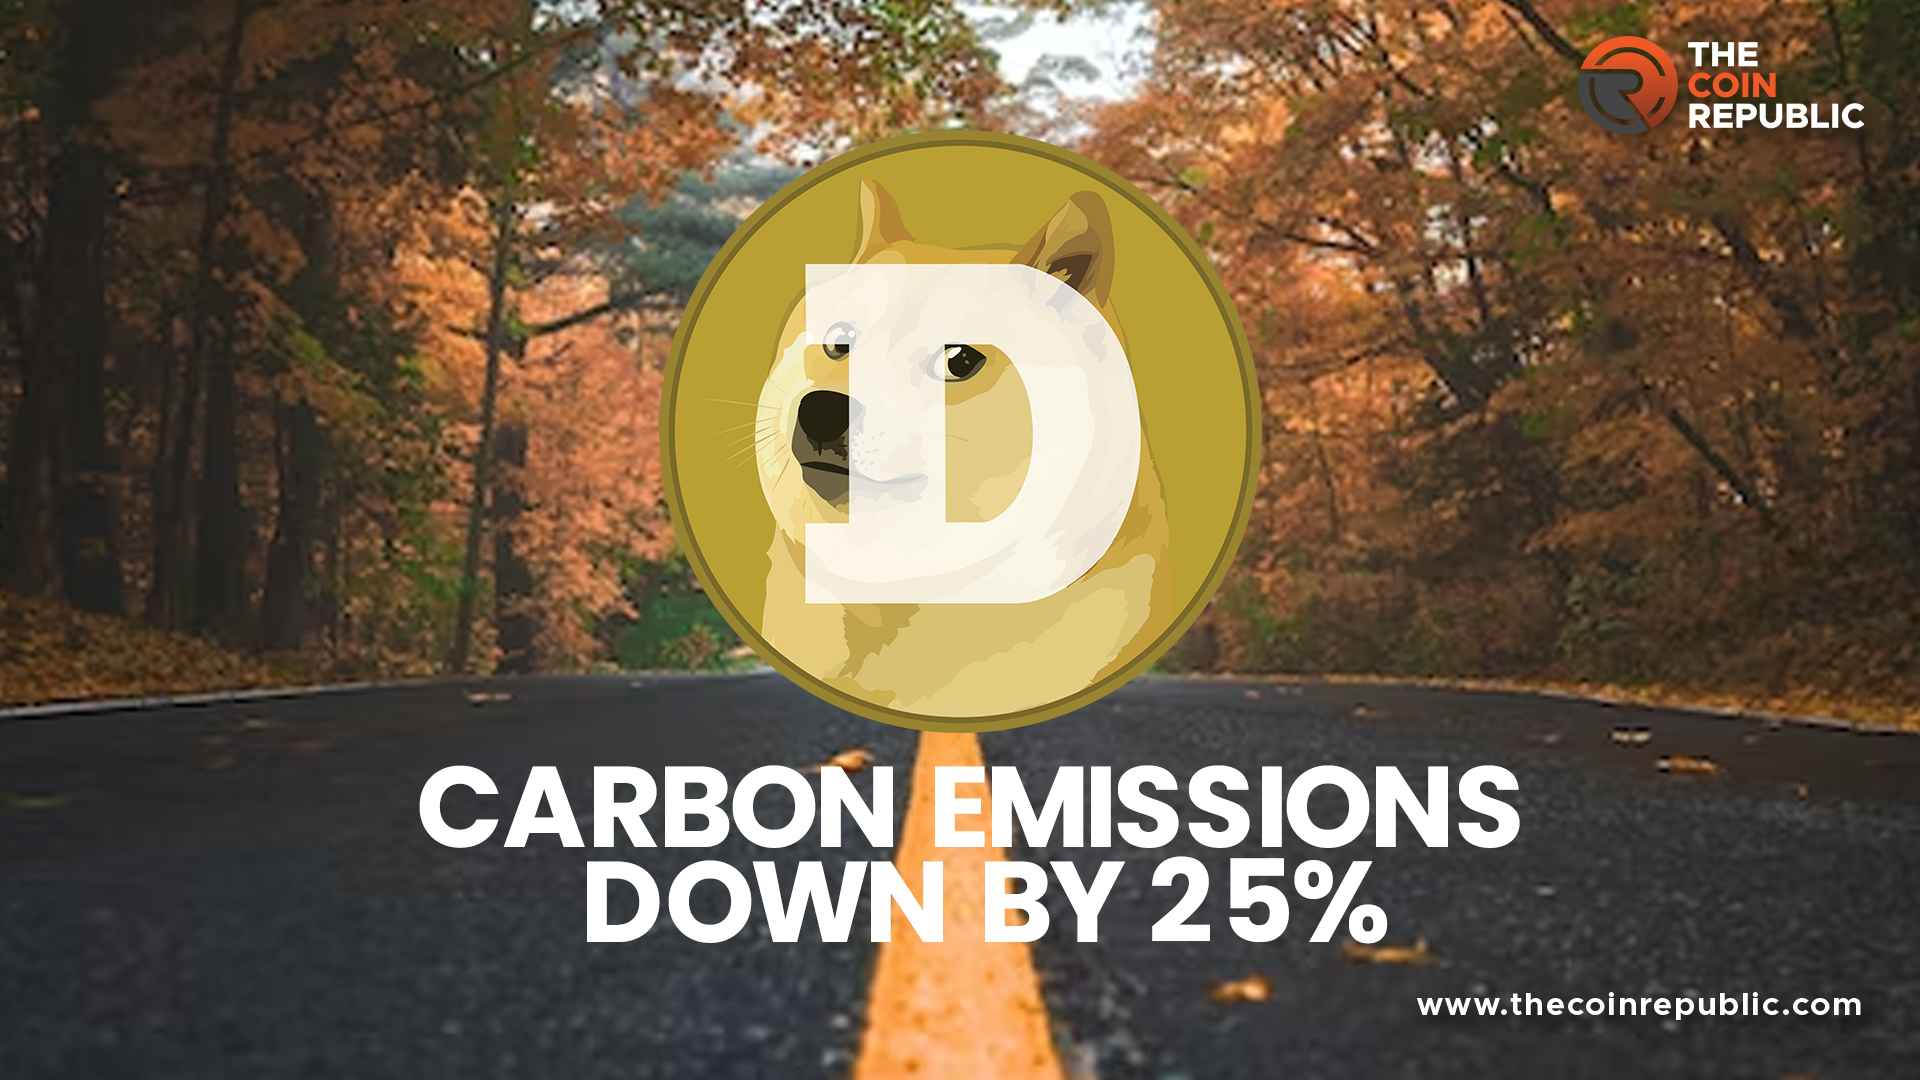 Dogecoin Carbon Emissions Reduced by 25%